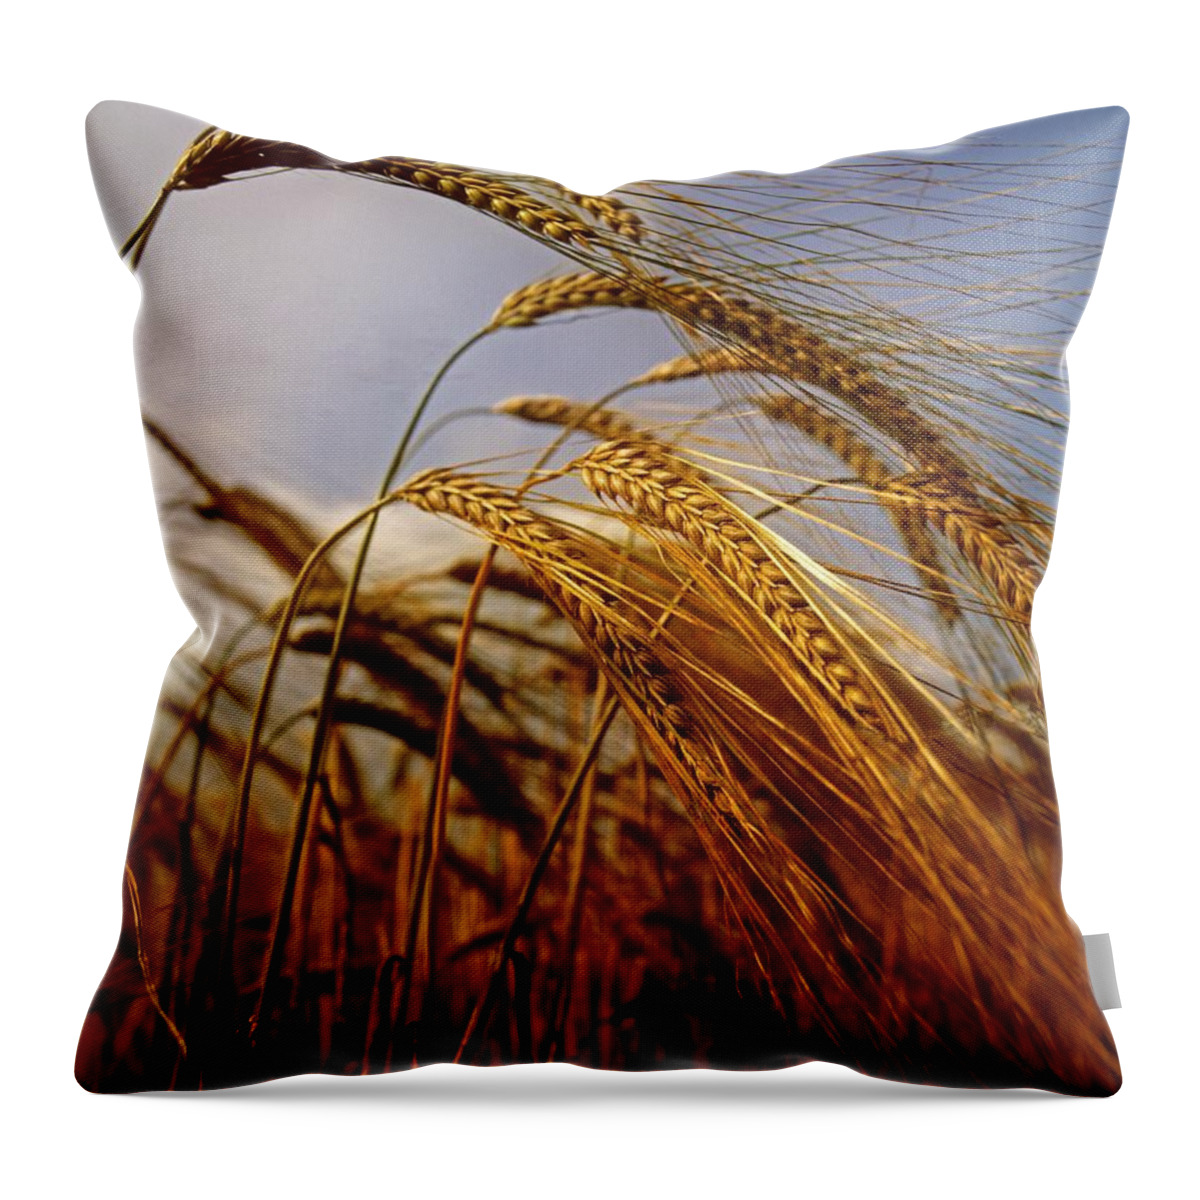 Barley Throw Pillow featuring the photograph Barley, Co Meath, Ireland by The Irish Image Collection 